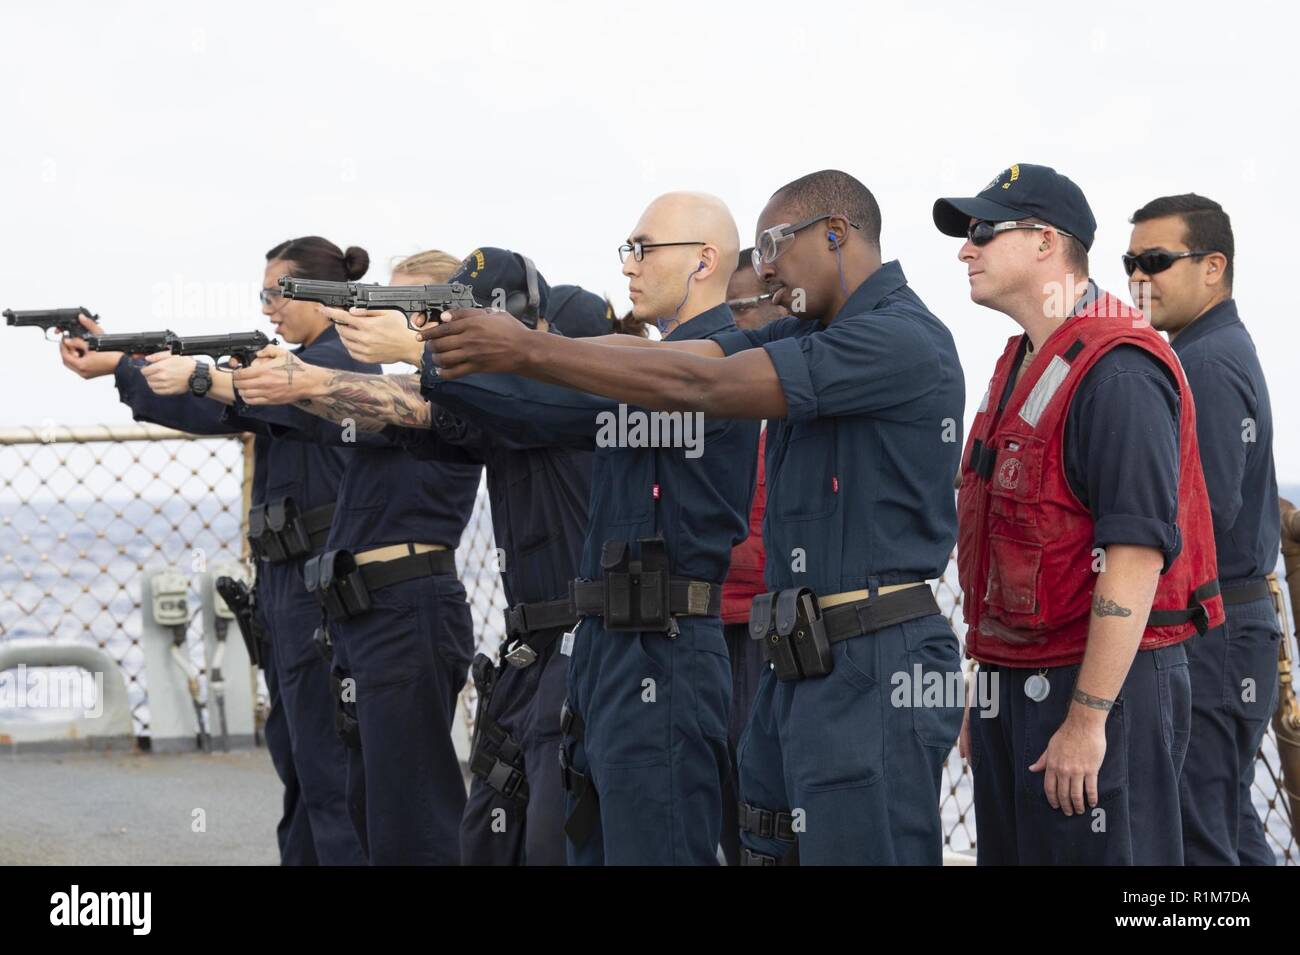 MEDITERRANEAN SEA (Oct. 17, 2018) Sailors fire M9 service pistols during a small-arms qualification course aboard the Arleigh Burke-class guided-missile destroyer USS Arleigh Burke (DDG 51) in the Mediterranean Sea Oct. 17, 2018. Arleigh Burke, homeported at Naval Station Norfolk, is conducting naval operations in the U.S. 6th Fleet area of operations in support of U.S. national security interests in Europe and Africa. Stock Photo